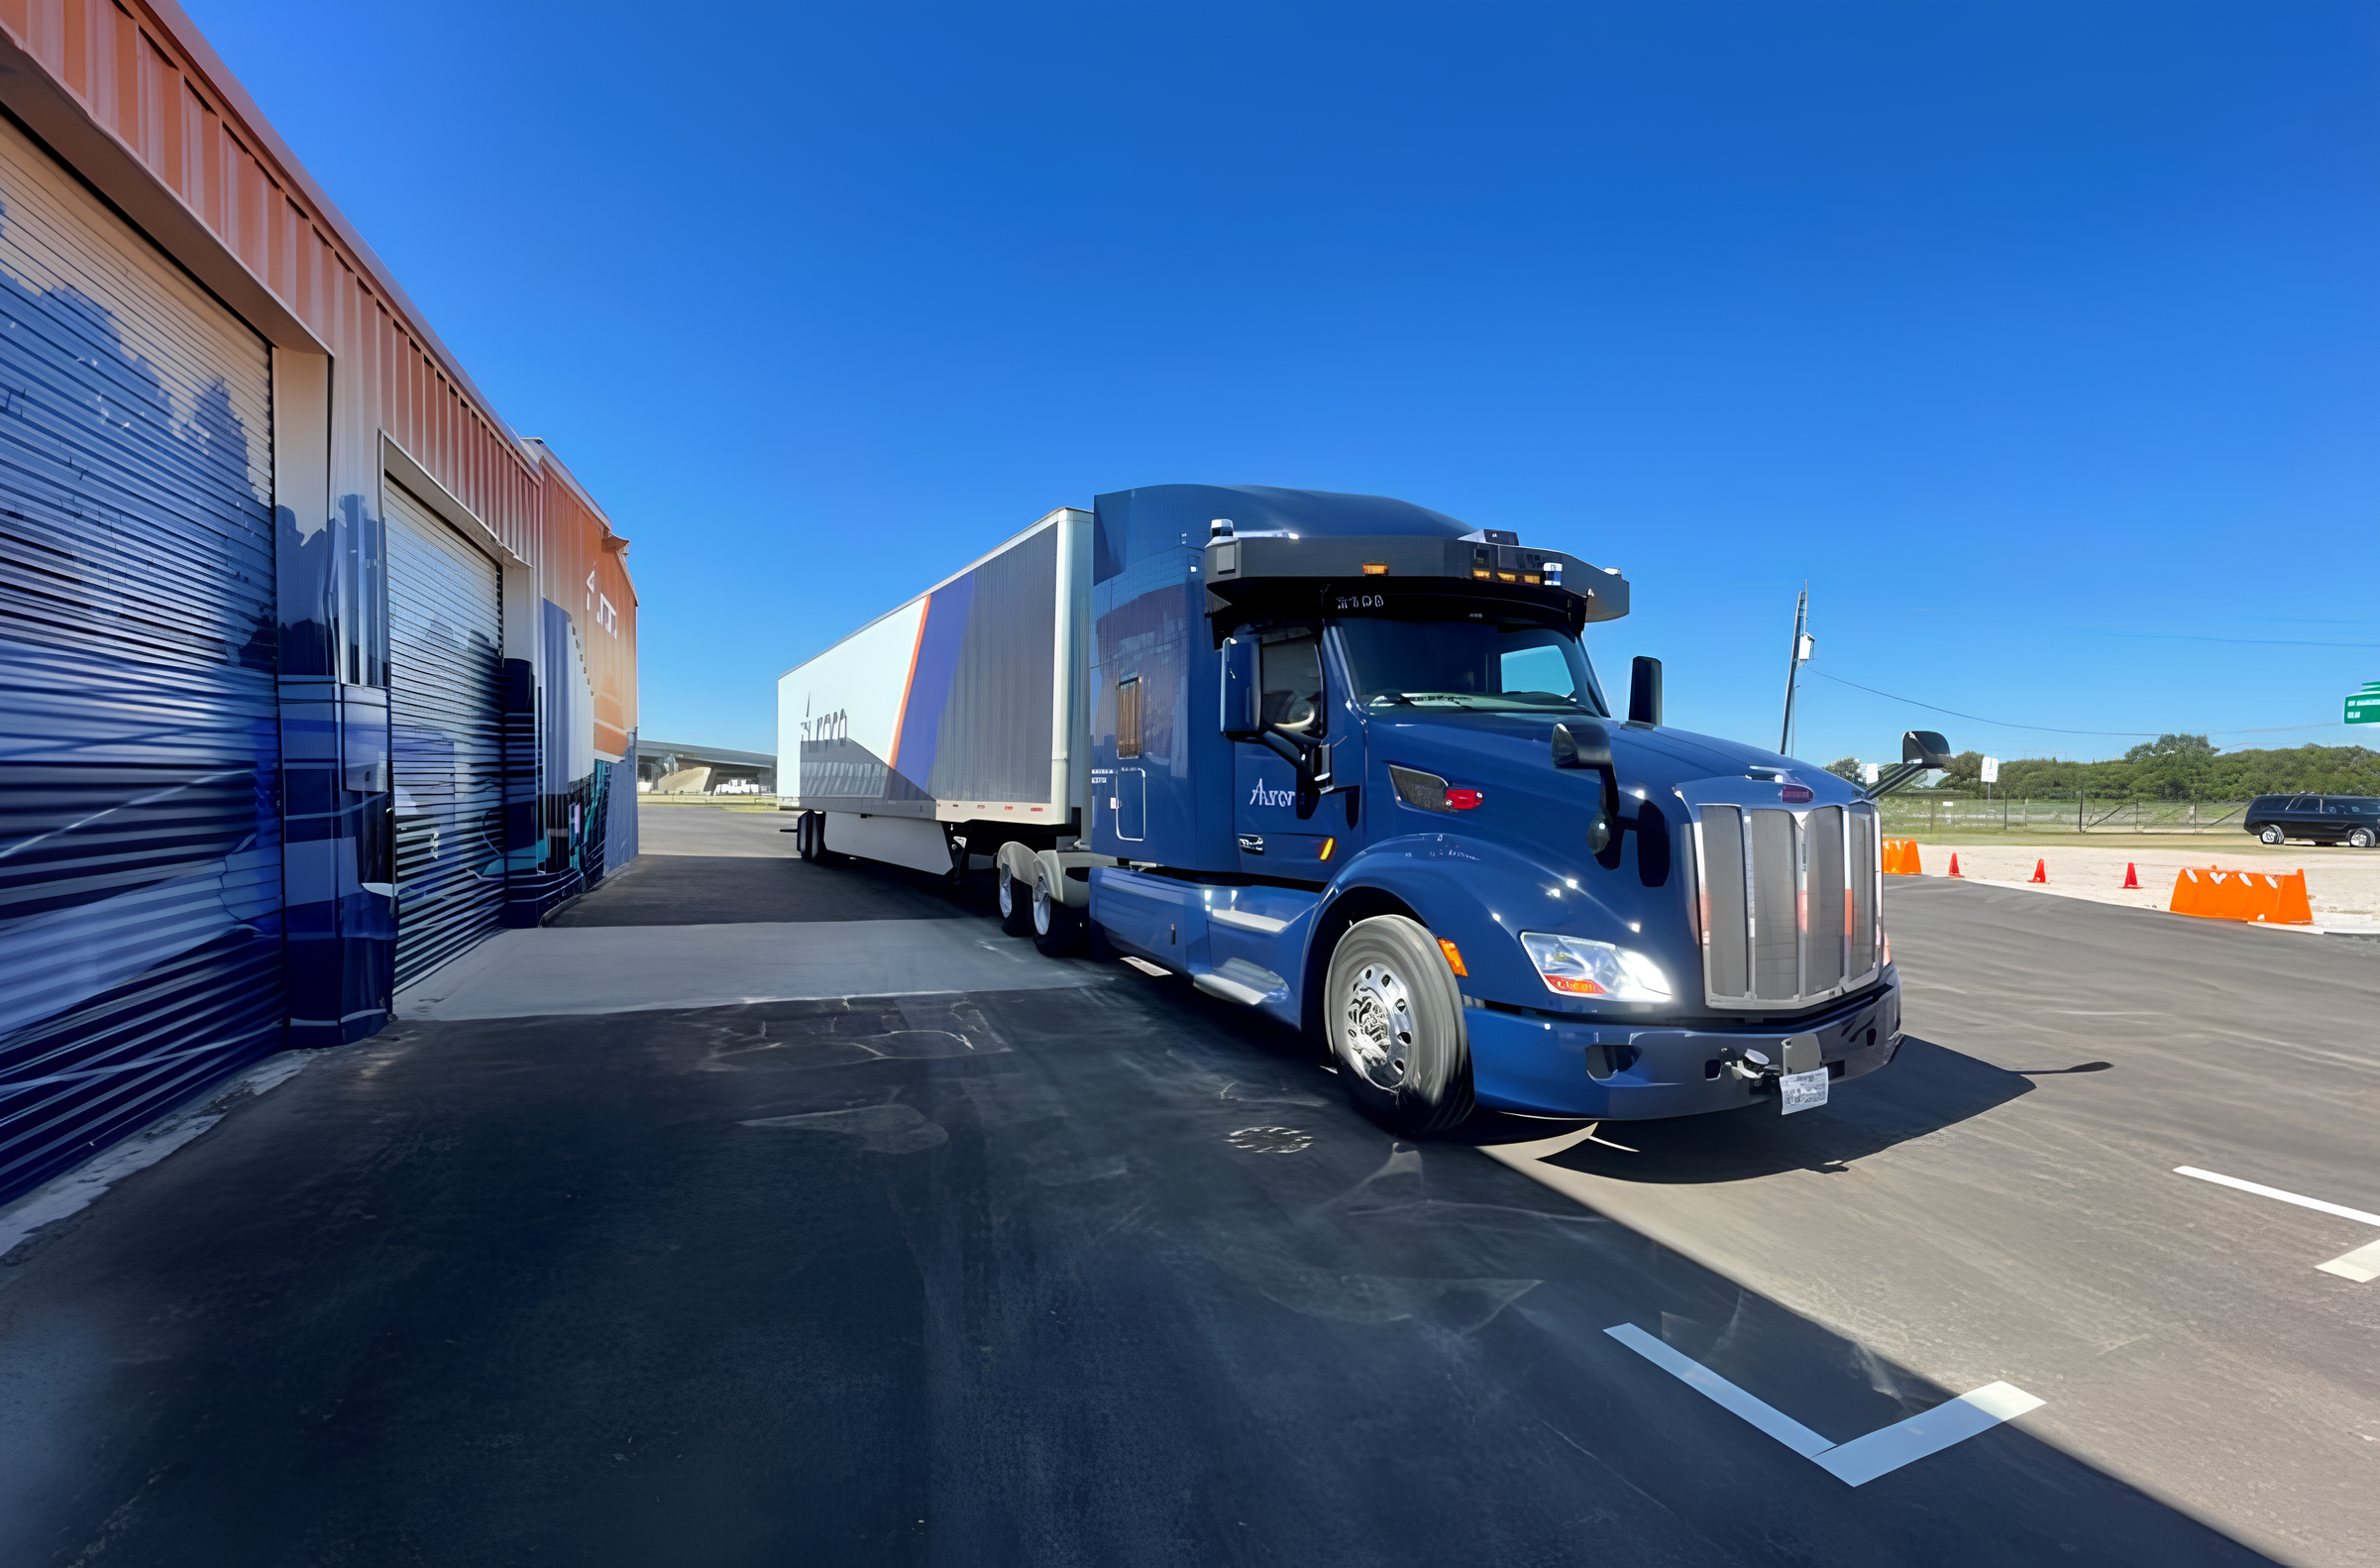 <p>While many states, including Texas and Arkansas, have allowed the testing and operation of self-driving trucks, California - home to Alphabet, Apple and some of the most cutting-edge tech startups - bars autonomous trucks weighing more than 10,001 pounds.</p>